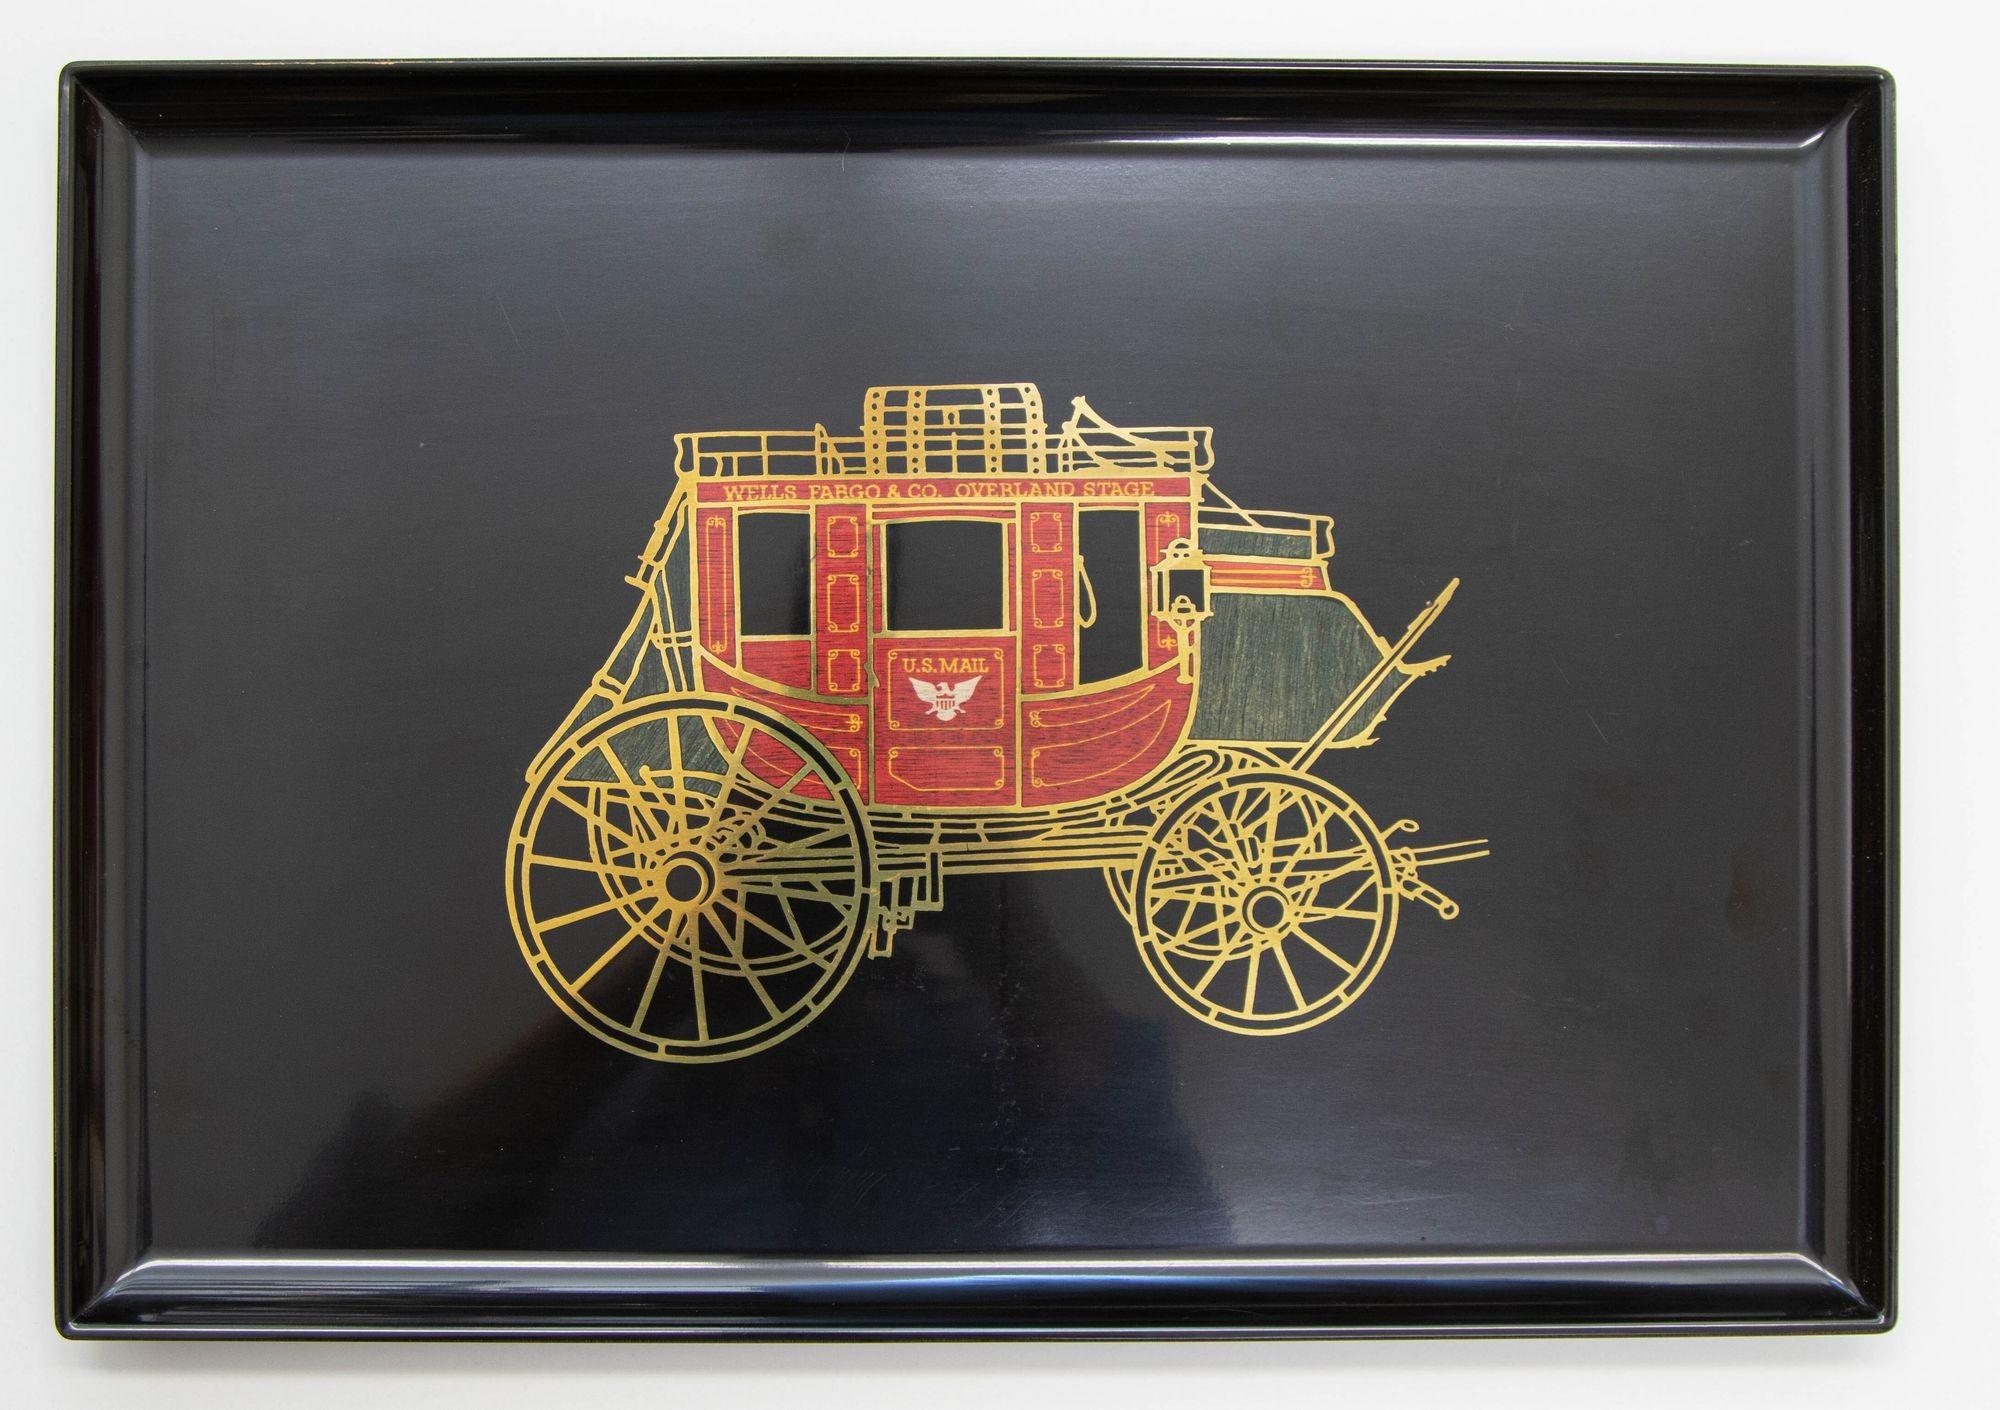 1960s Vintage Couroc of Monterey Black Resin Bakelite Like Tray Featuring the Wells Fargo Stagecoach.
Dimensions : Large 18